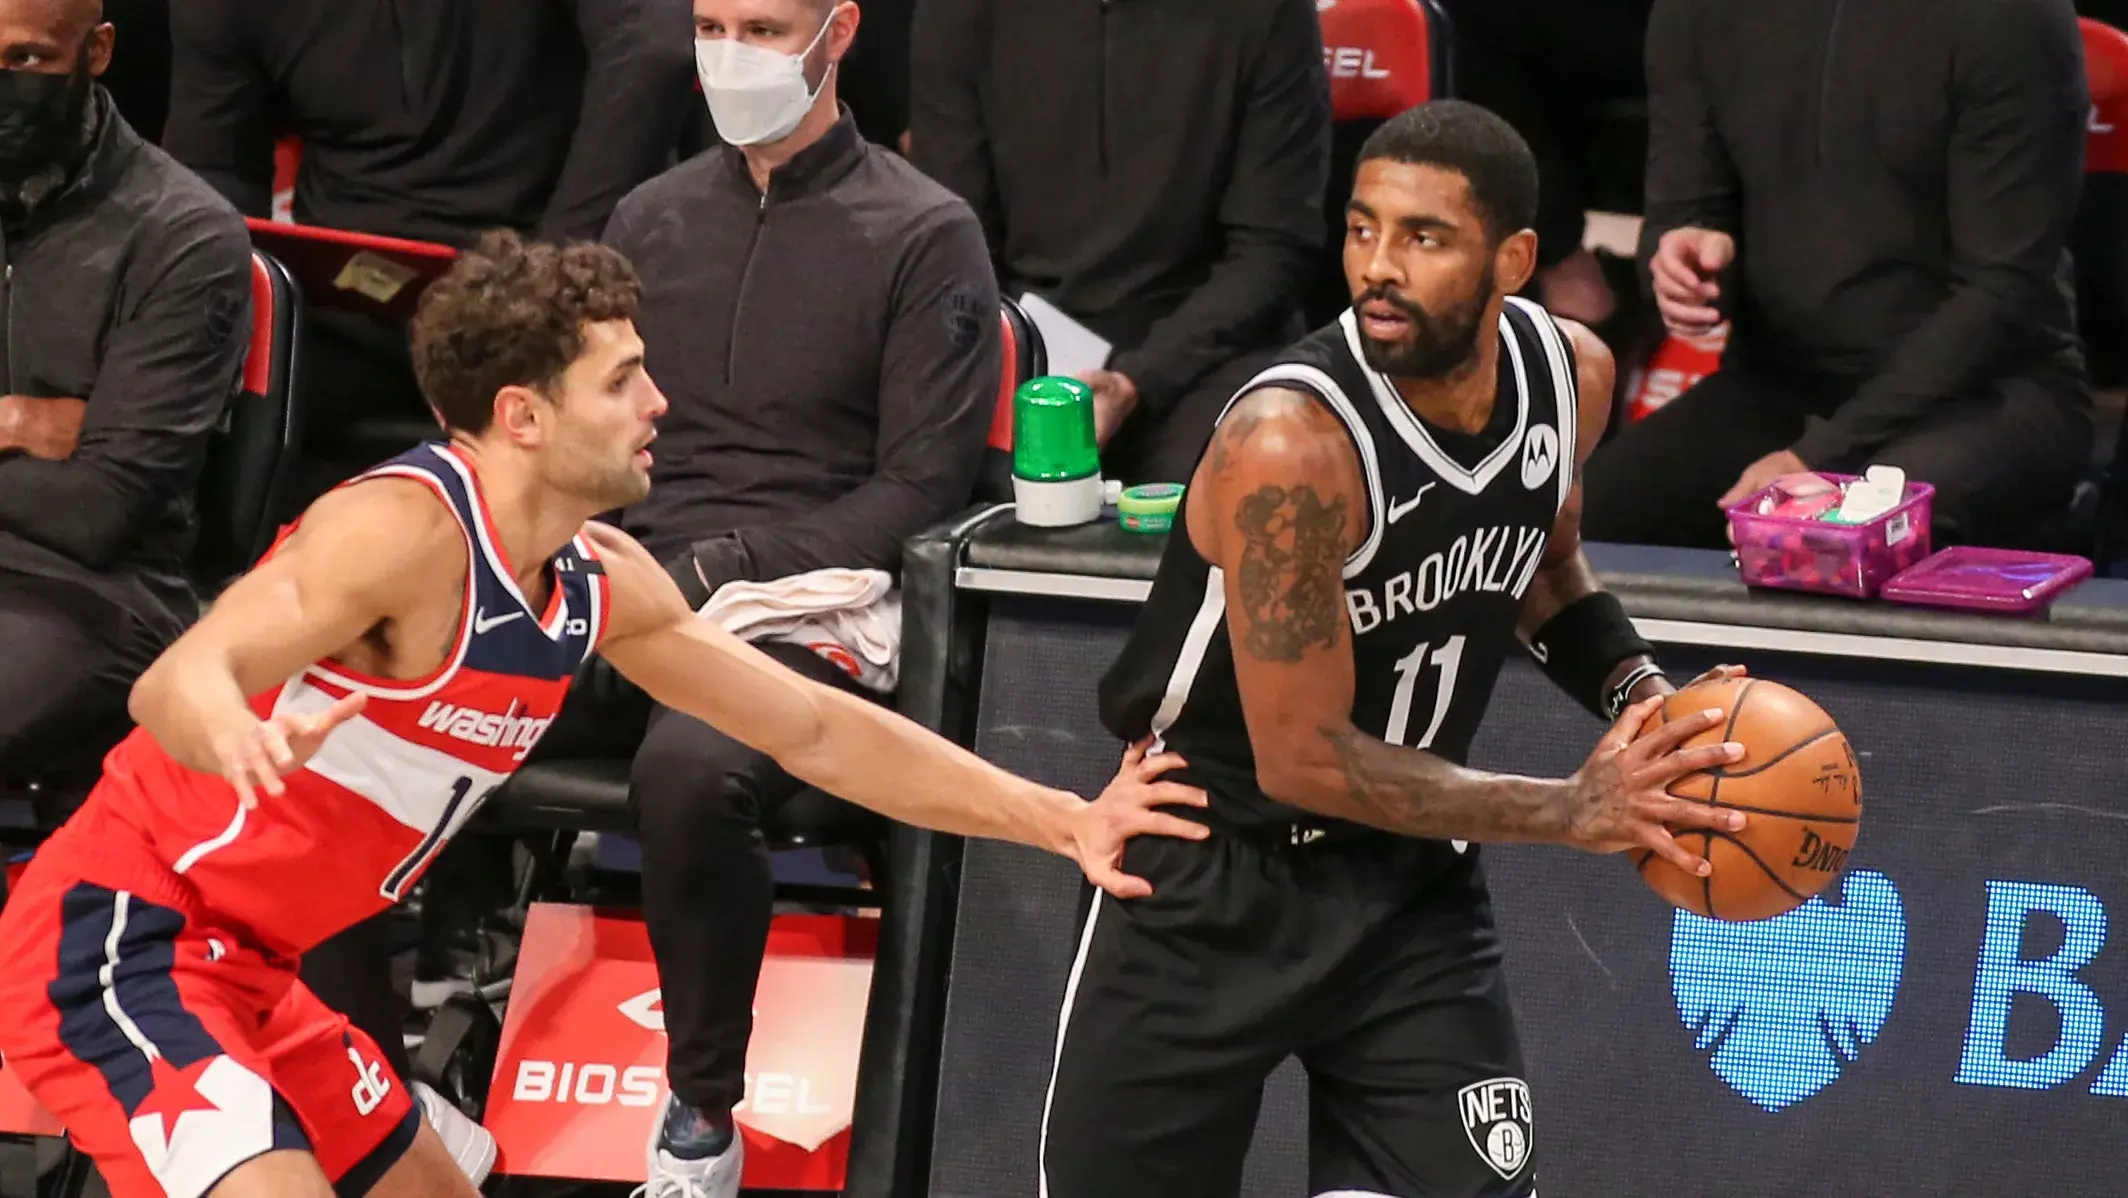 Dec 13, 2020; Brooklyn, New York, USA; Brooklyn Nets guard Kyrie Irving (11) looks to make a pass in the first quarter against the Washington Wizards at Barclays Center. Mandatory Credit: Wendell Cruz-USA TODAY Sports / © Wendell Cruz-USA TODAY Sports